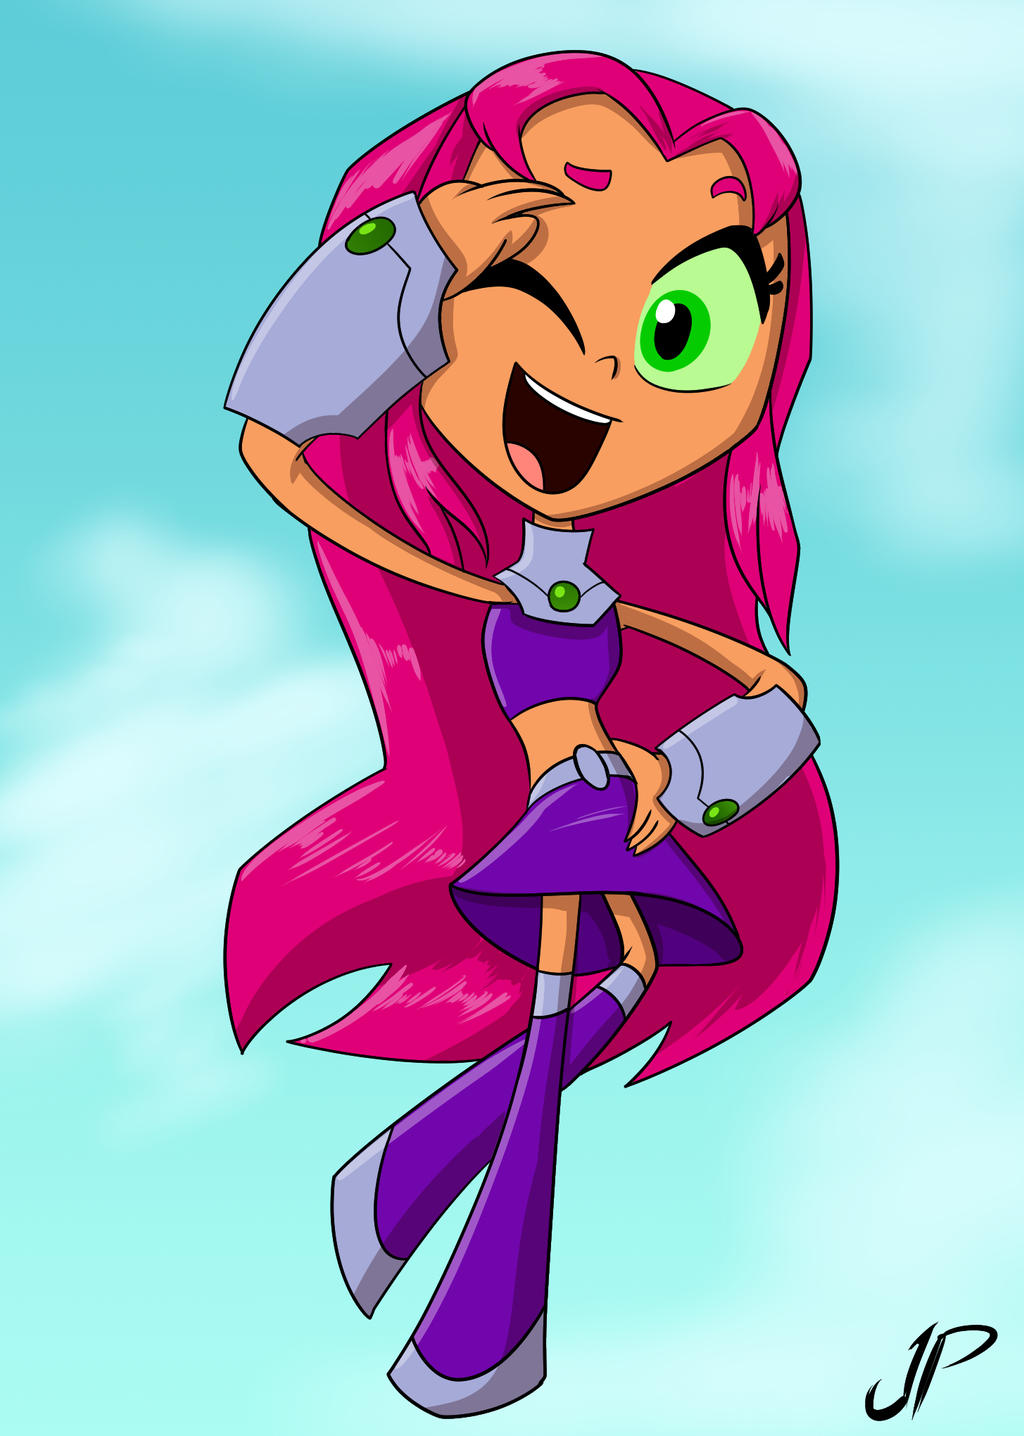 Starfire Teen Titans Go By Juacoproductionsarts On Deviantart